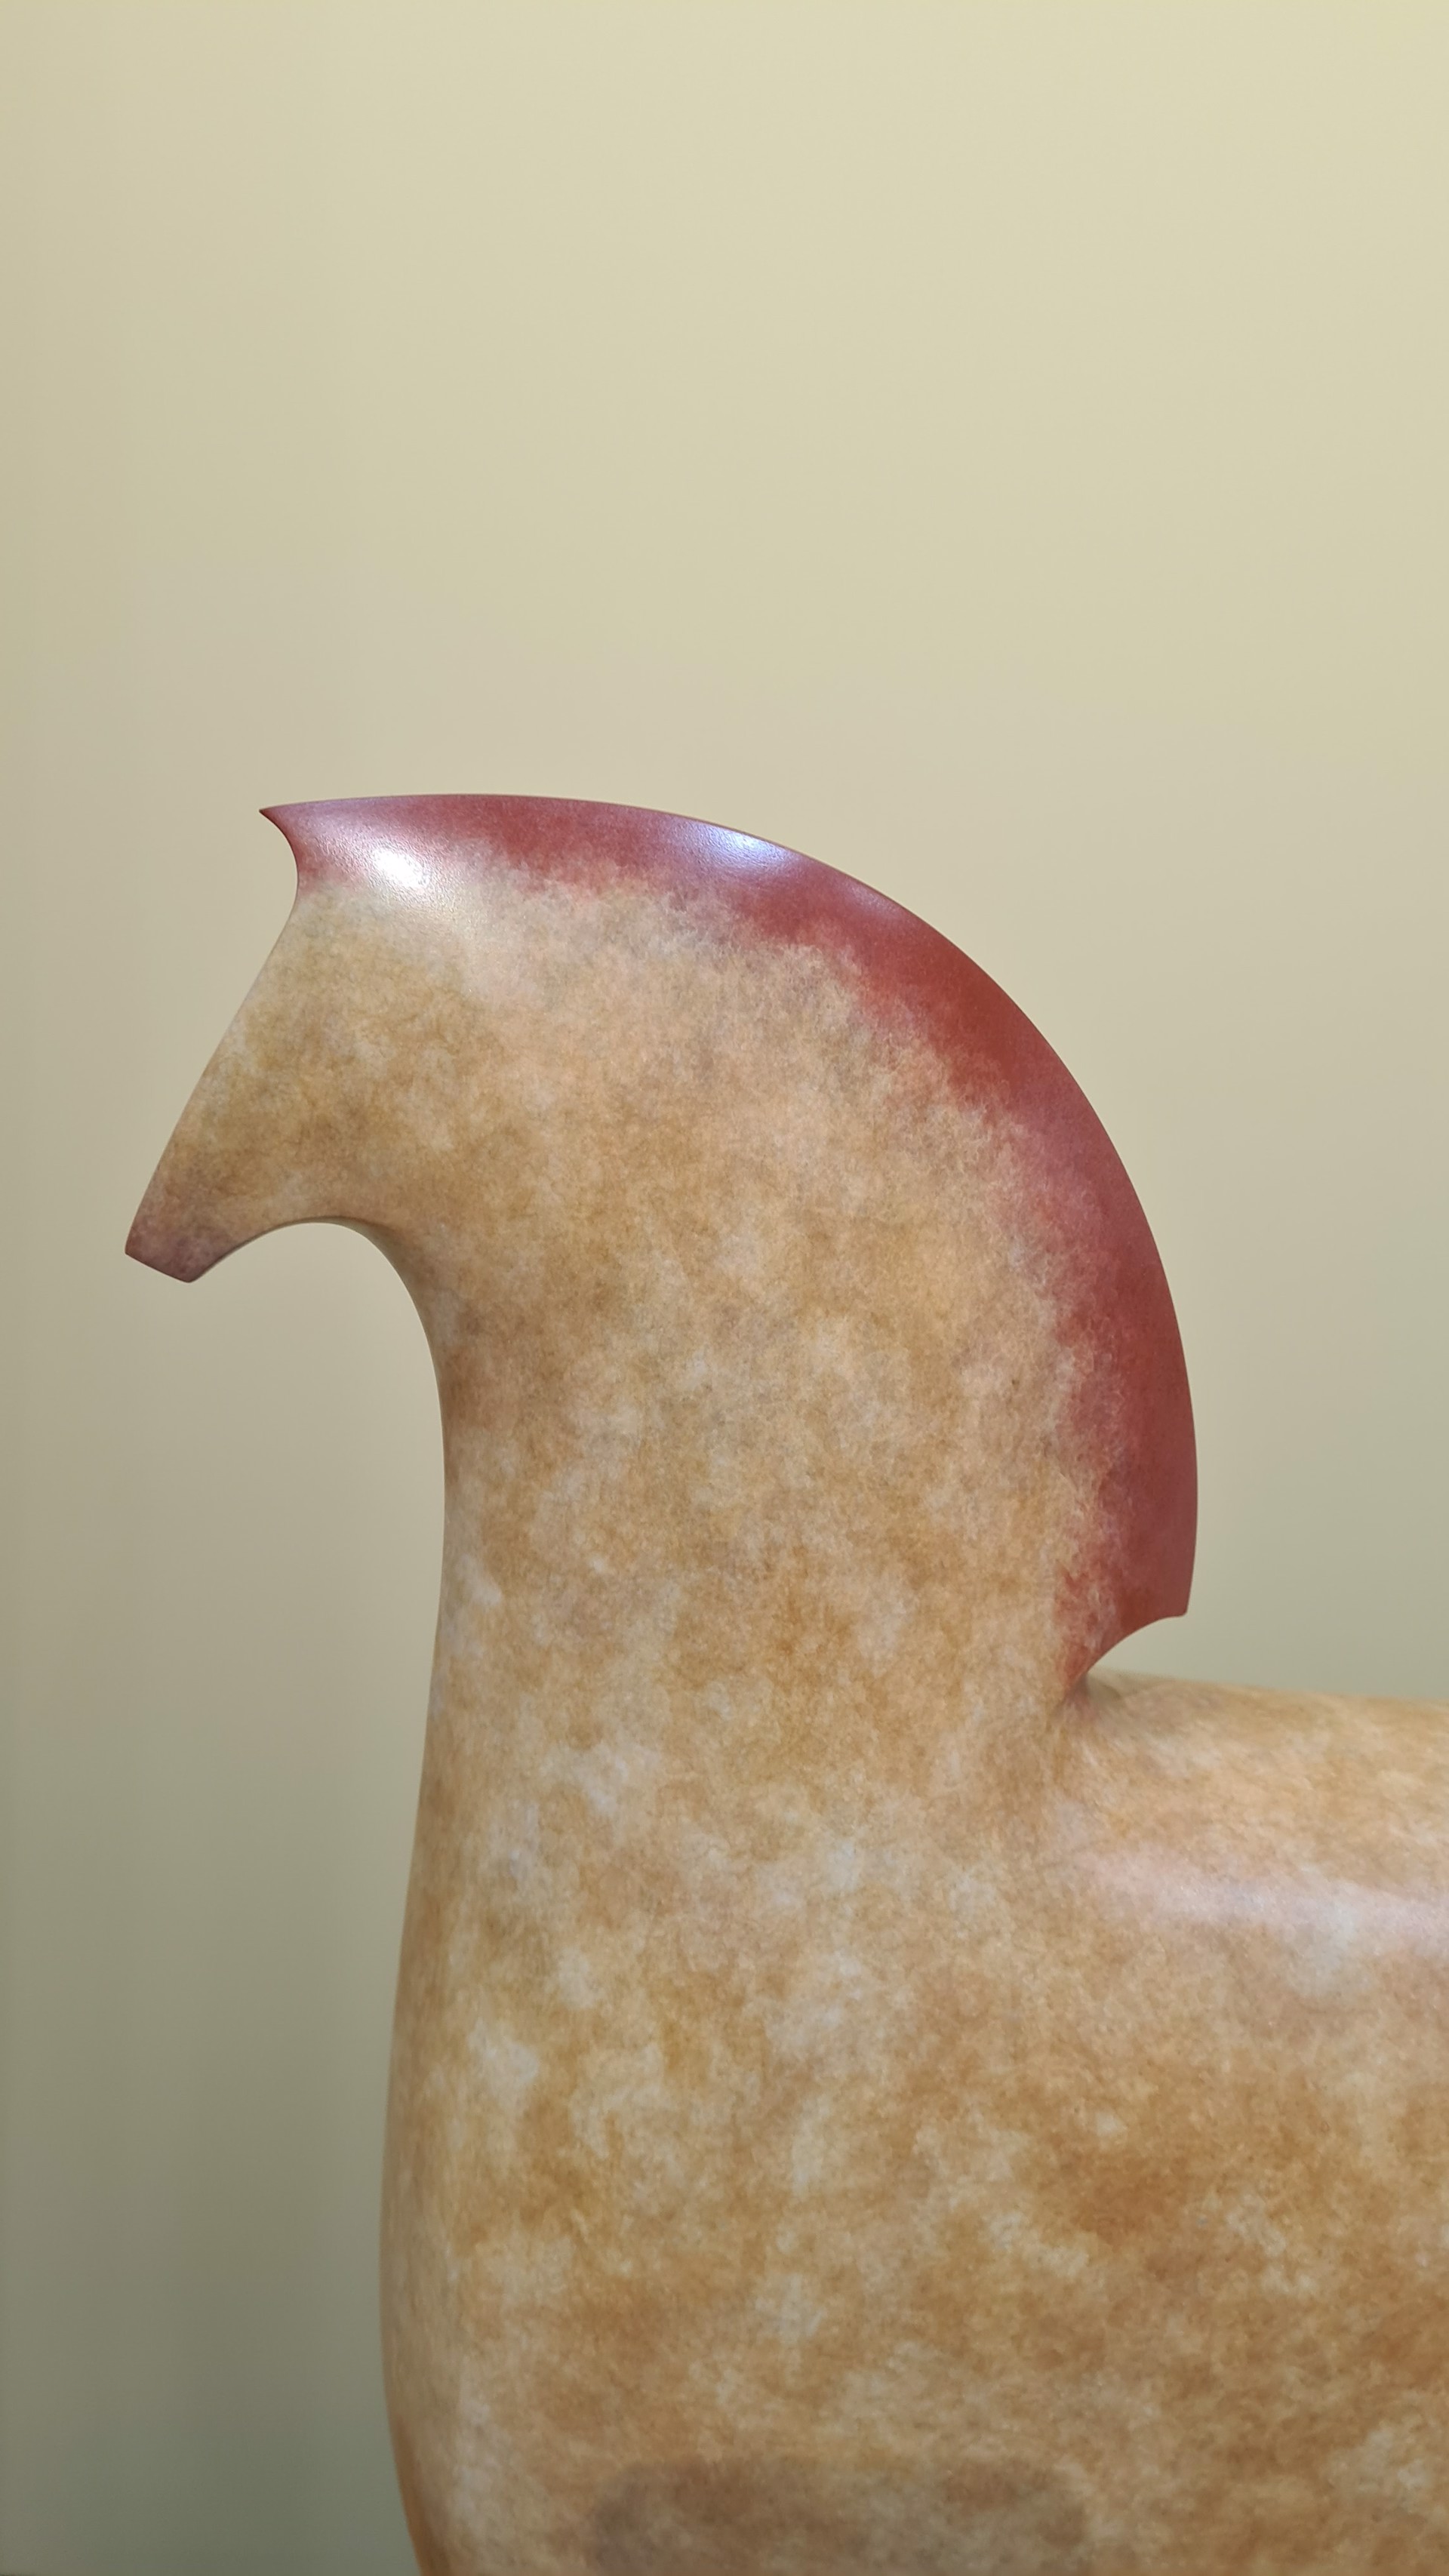 Hors by Stephen Page